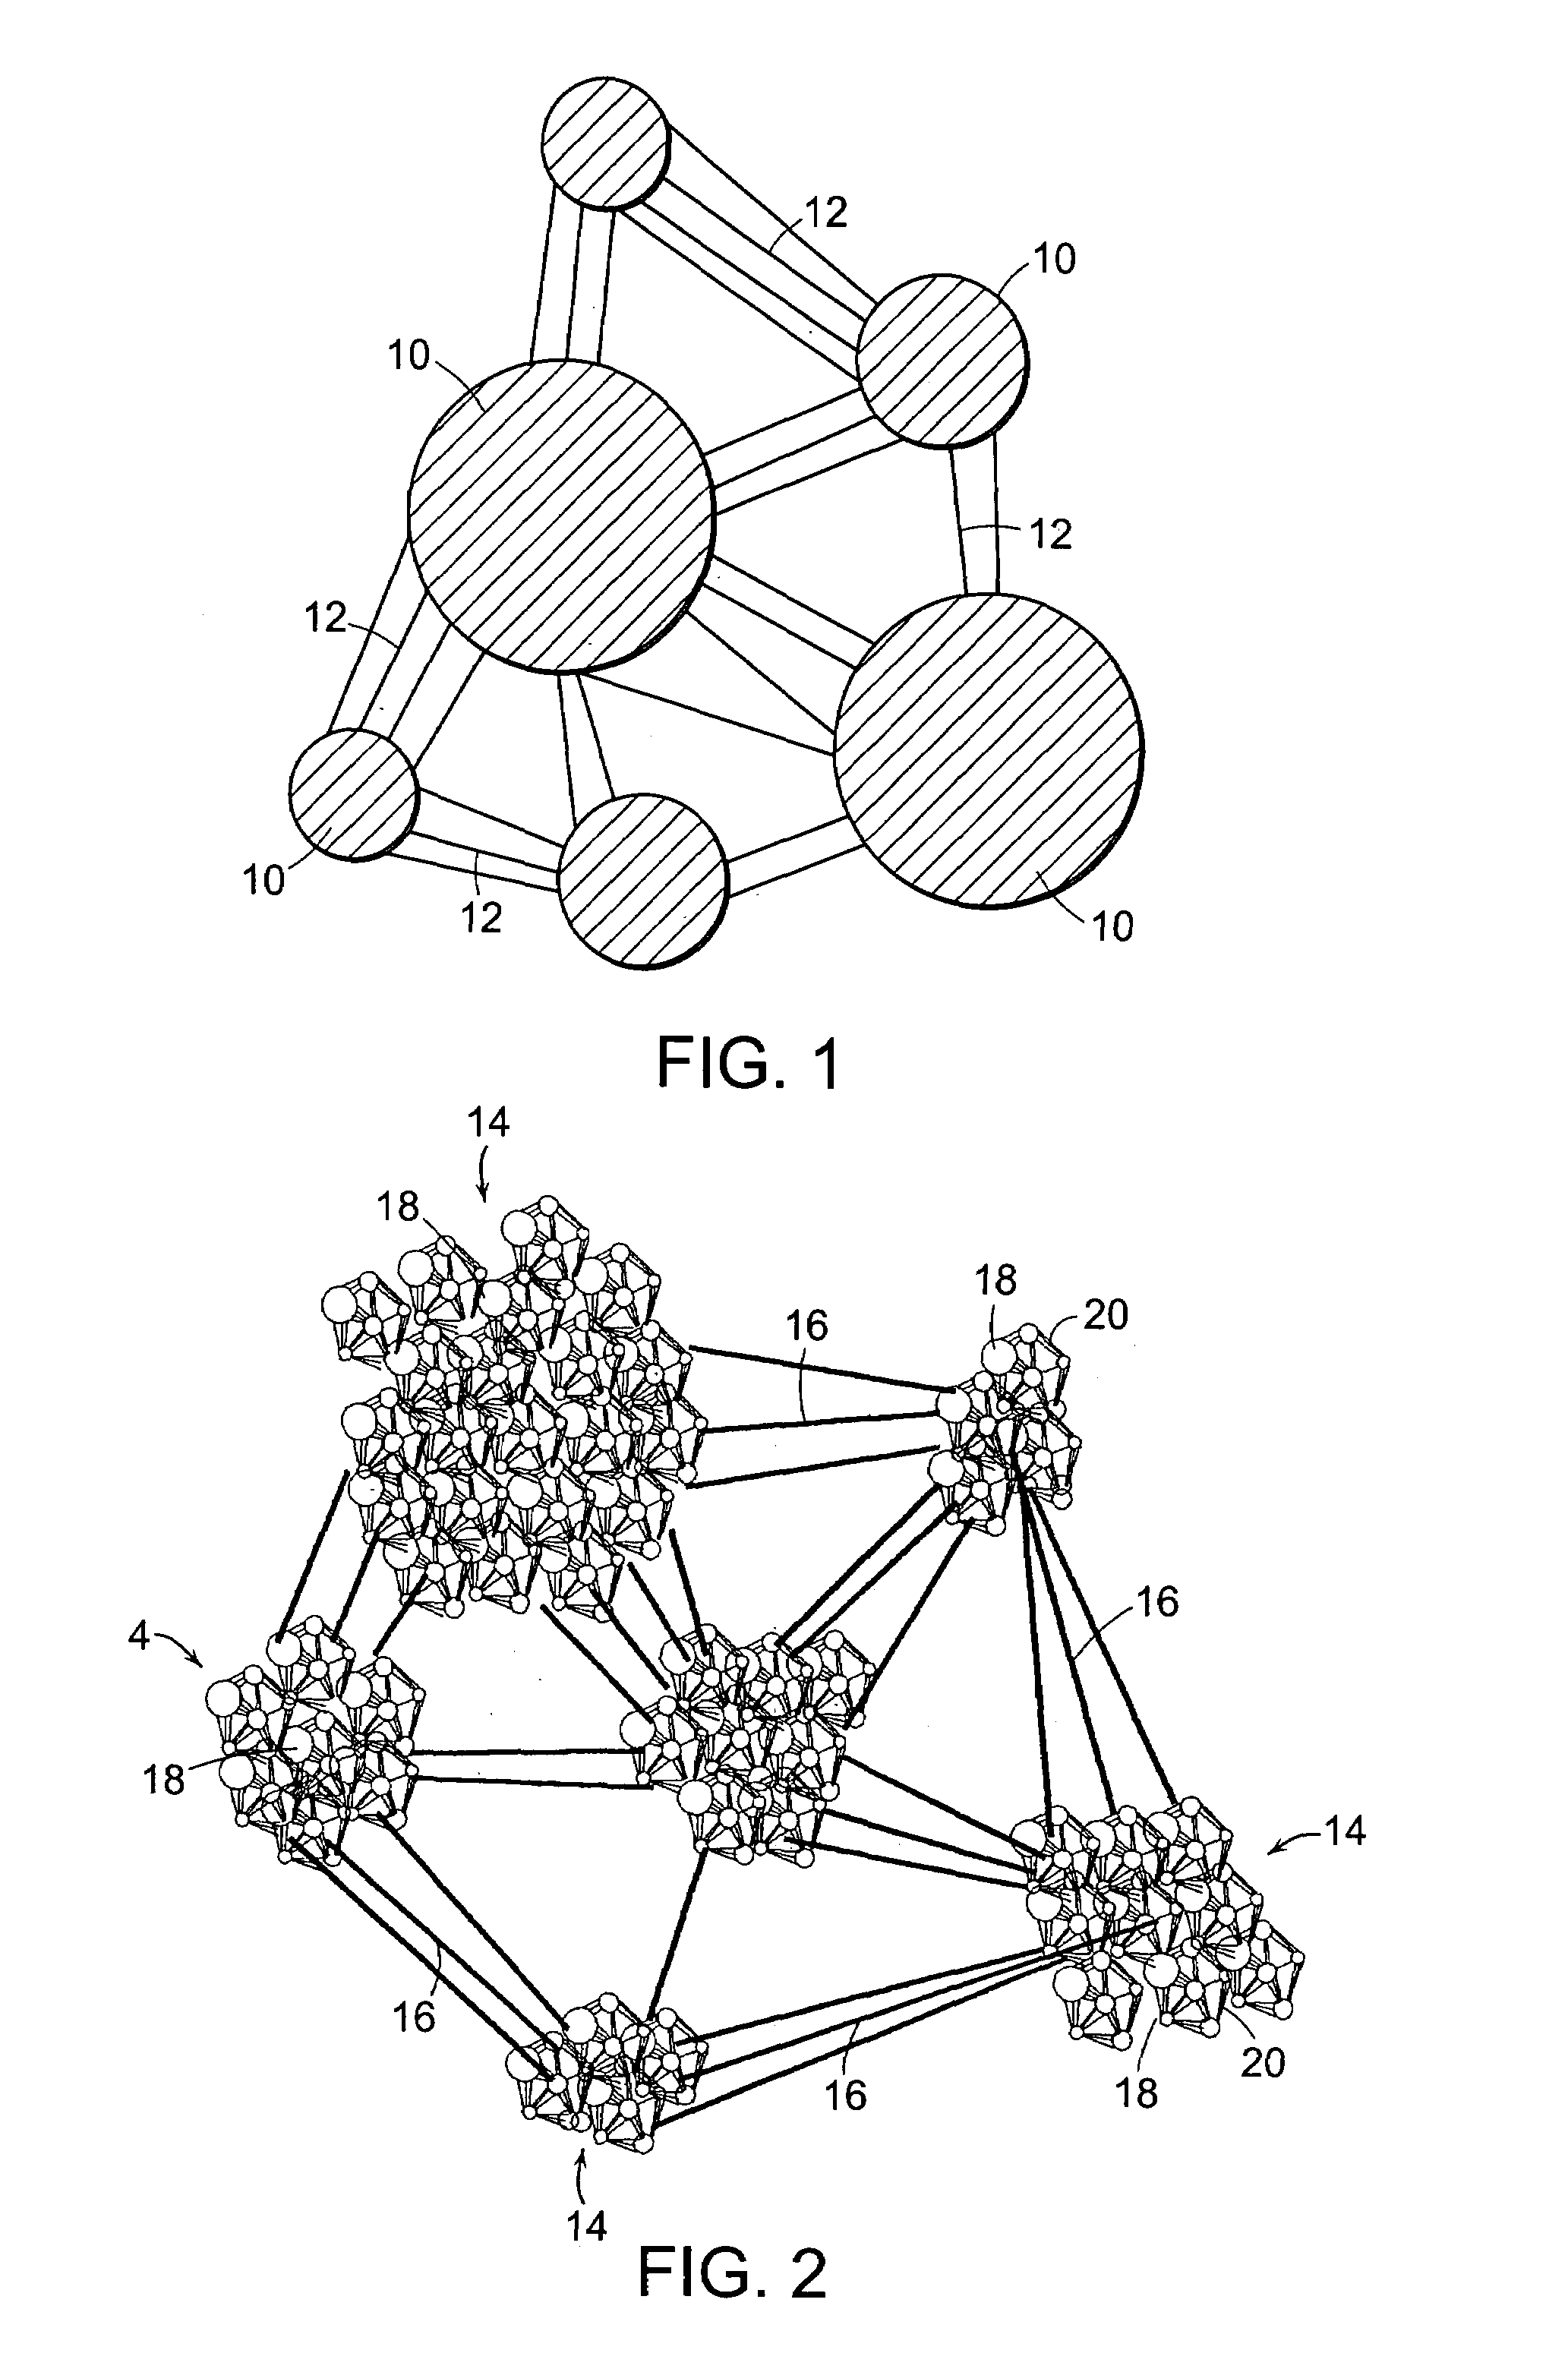 PTFE material with aggregations of nodes